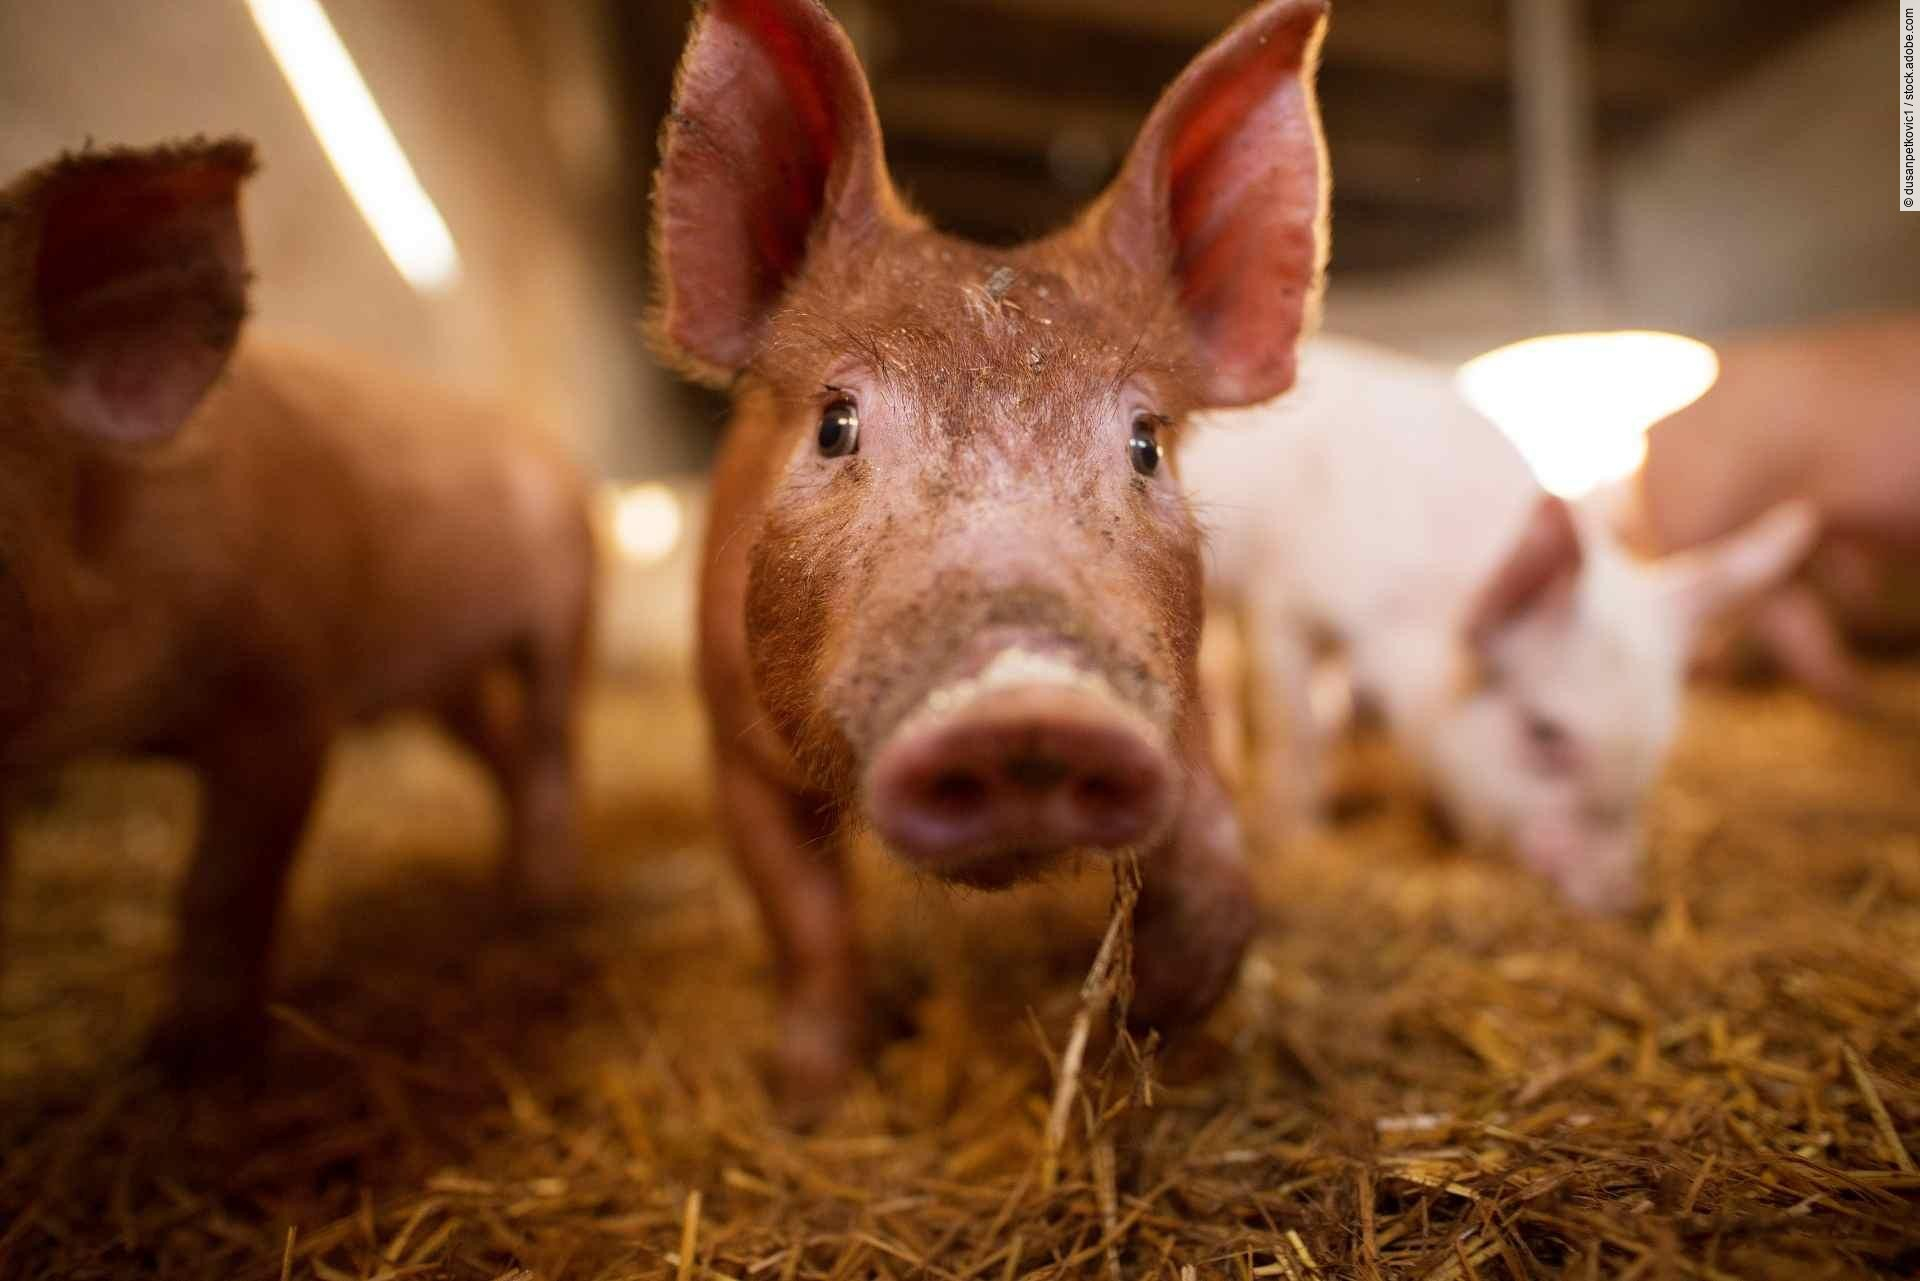 A small piglet in the farm. Swine in a stall. Shallow depth of f